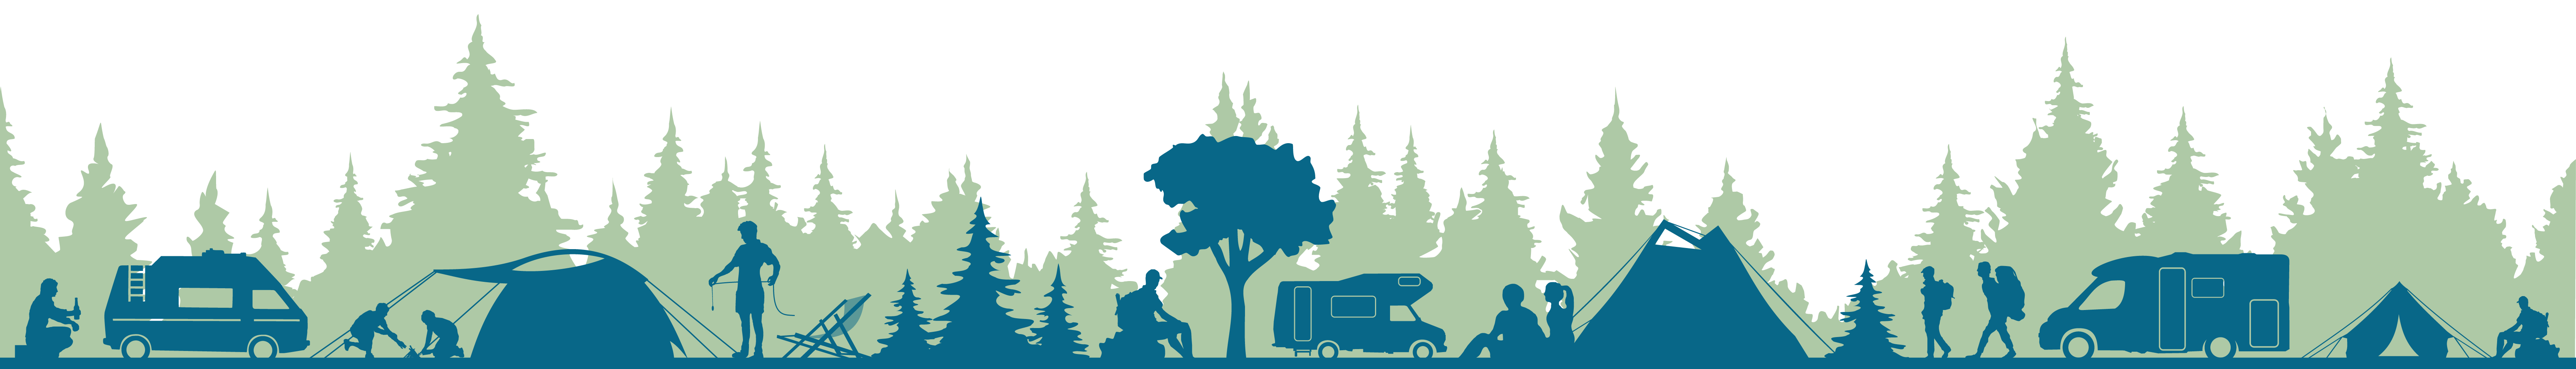 Camping graphic